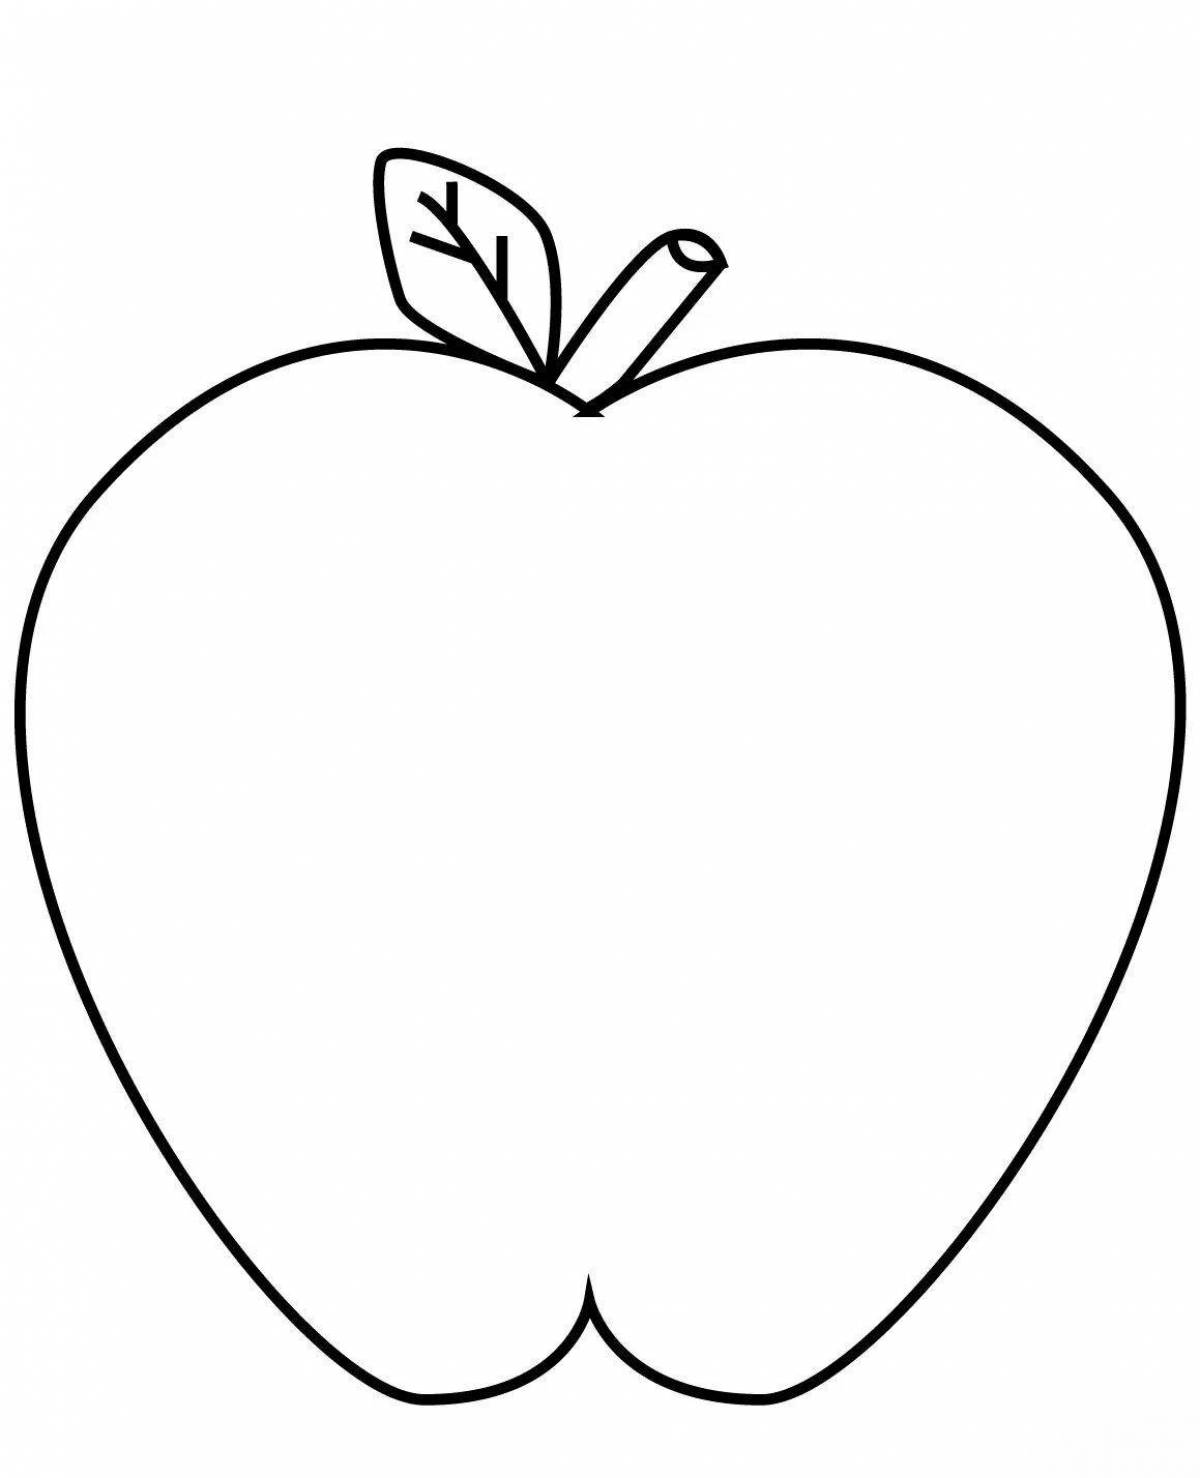 Colourful apple coloring book